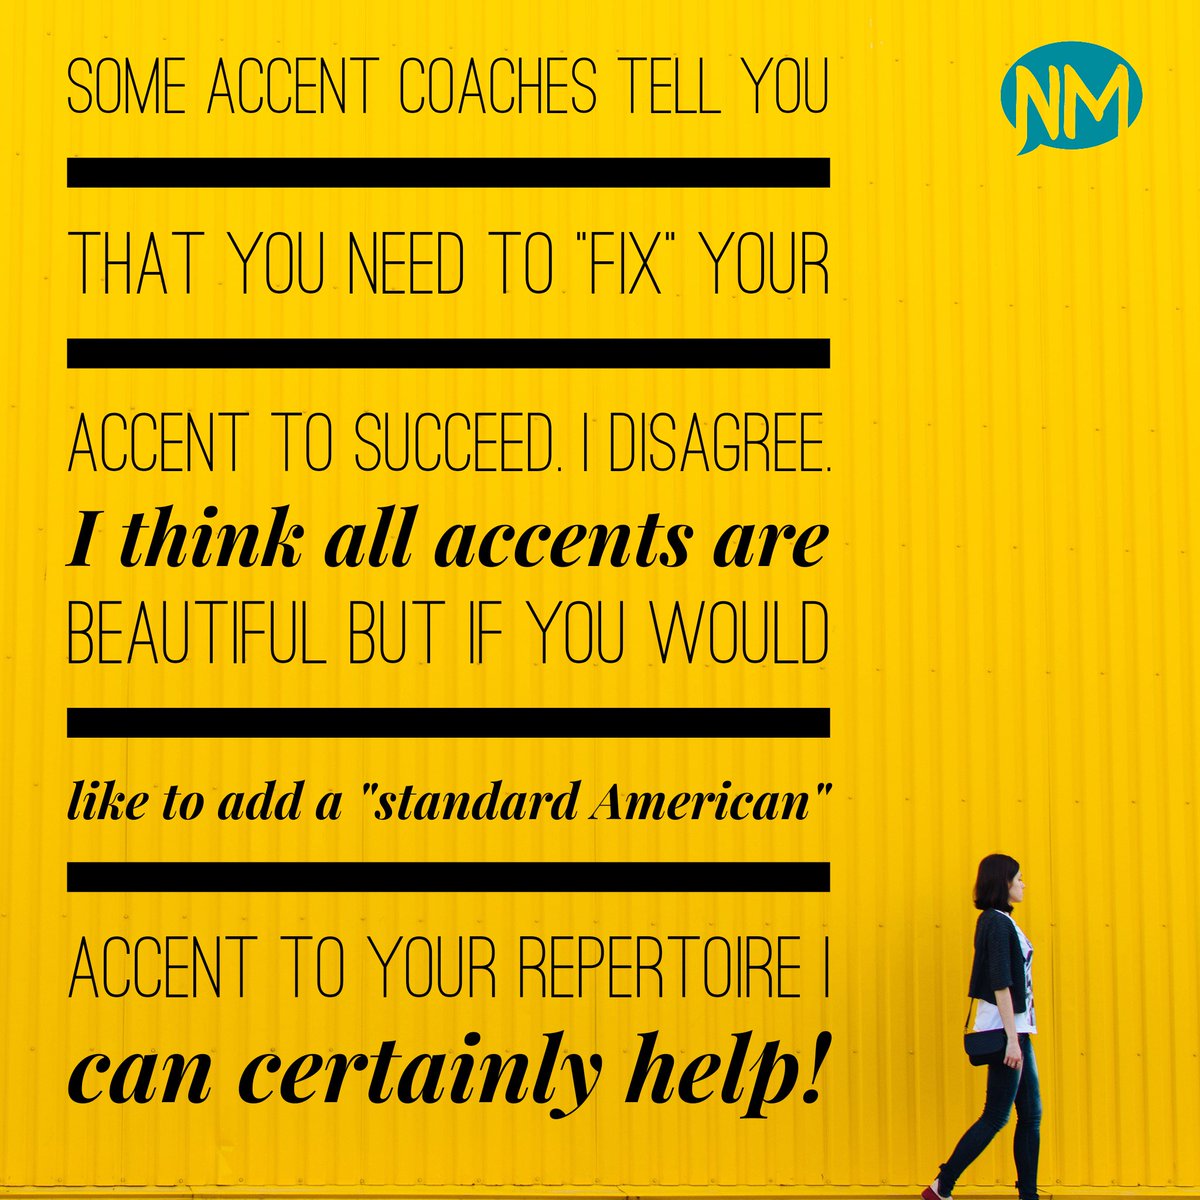 Your accent is you and beautiful but learning another, whether Standard American or something else, can help when building a character! ☺️
.
.
.
#accentcoach #dialectcoach #accentcoaching #dialectcoaching #accents #acting #actor #actingcoach #auditioncoach #auditions